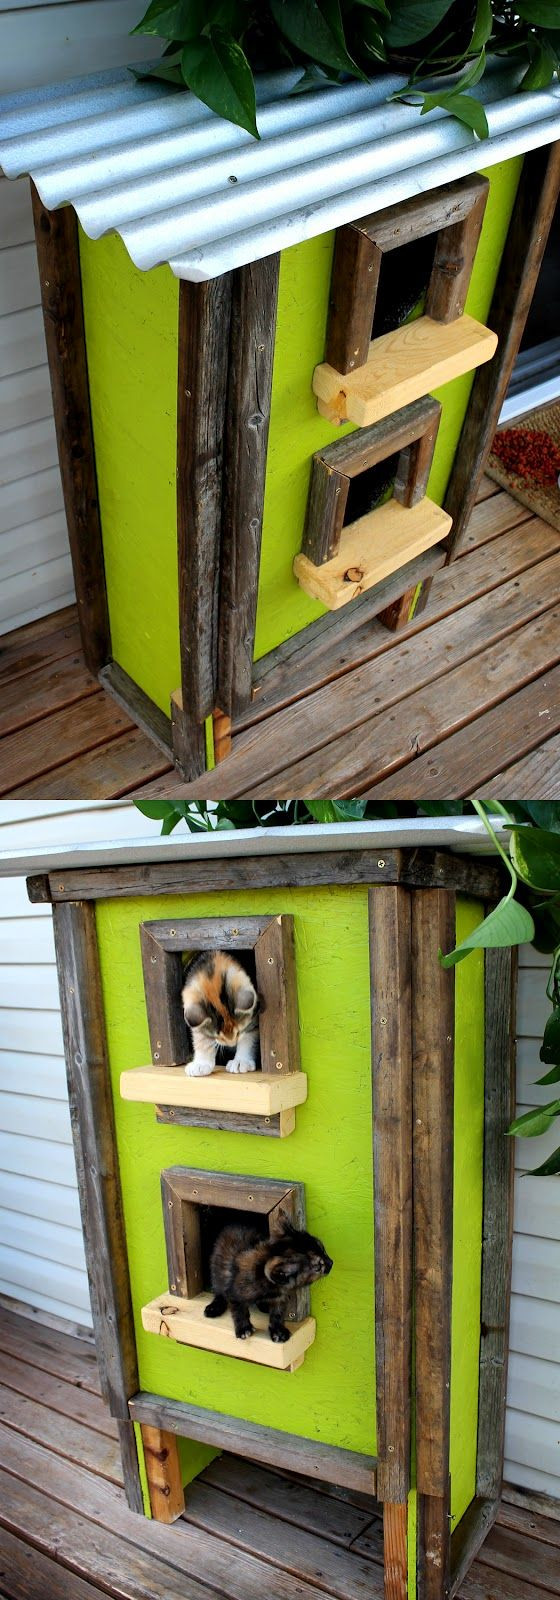 Insulated Outdoor Cat House DIY
 Customized Outdoor Cat House she doesn t give any how